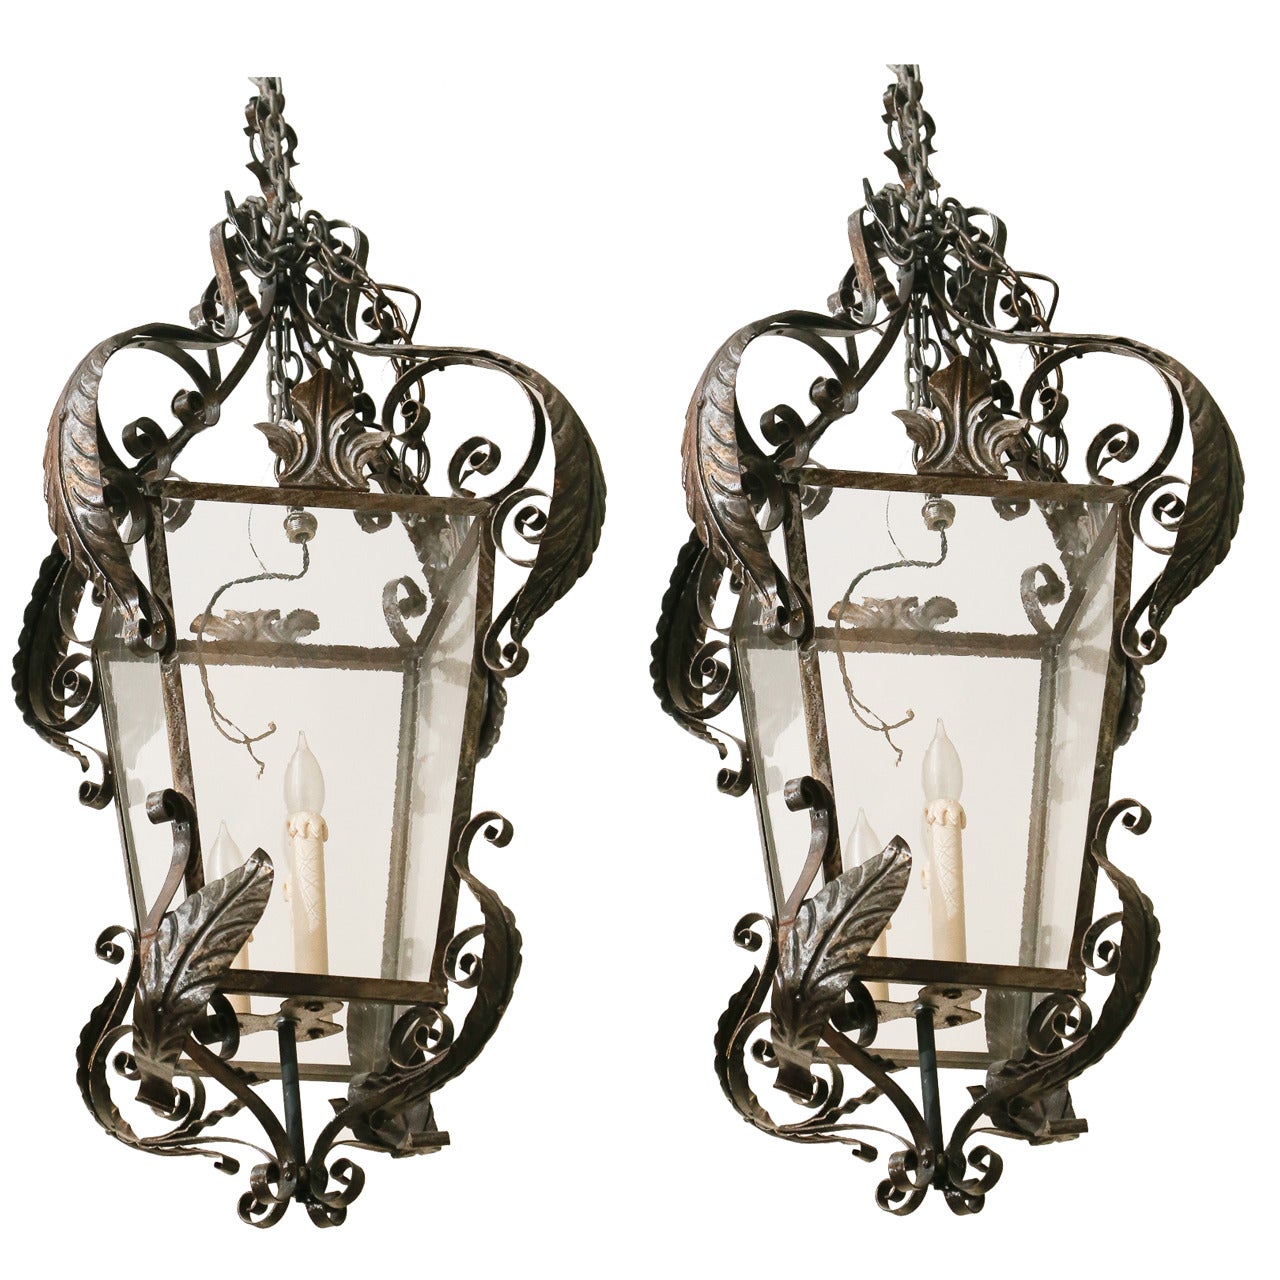 Pair of Metal Tole and Wrought Iron Lanterns